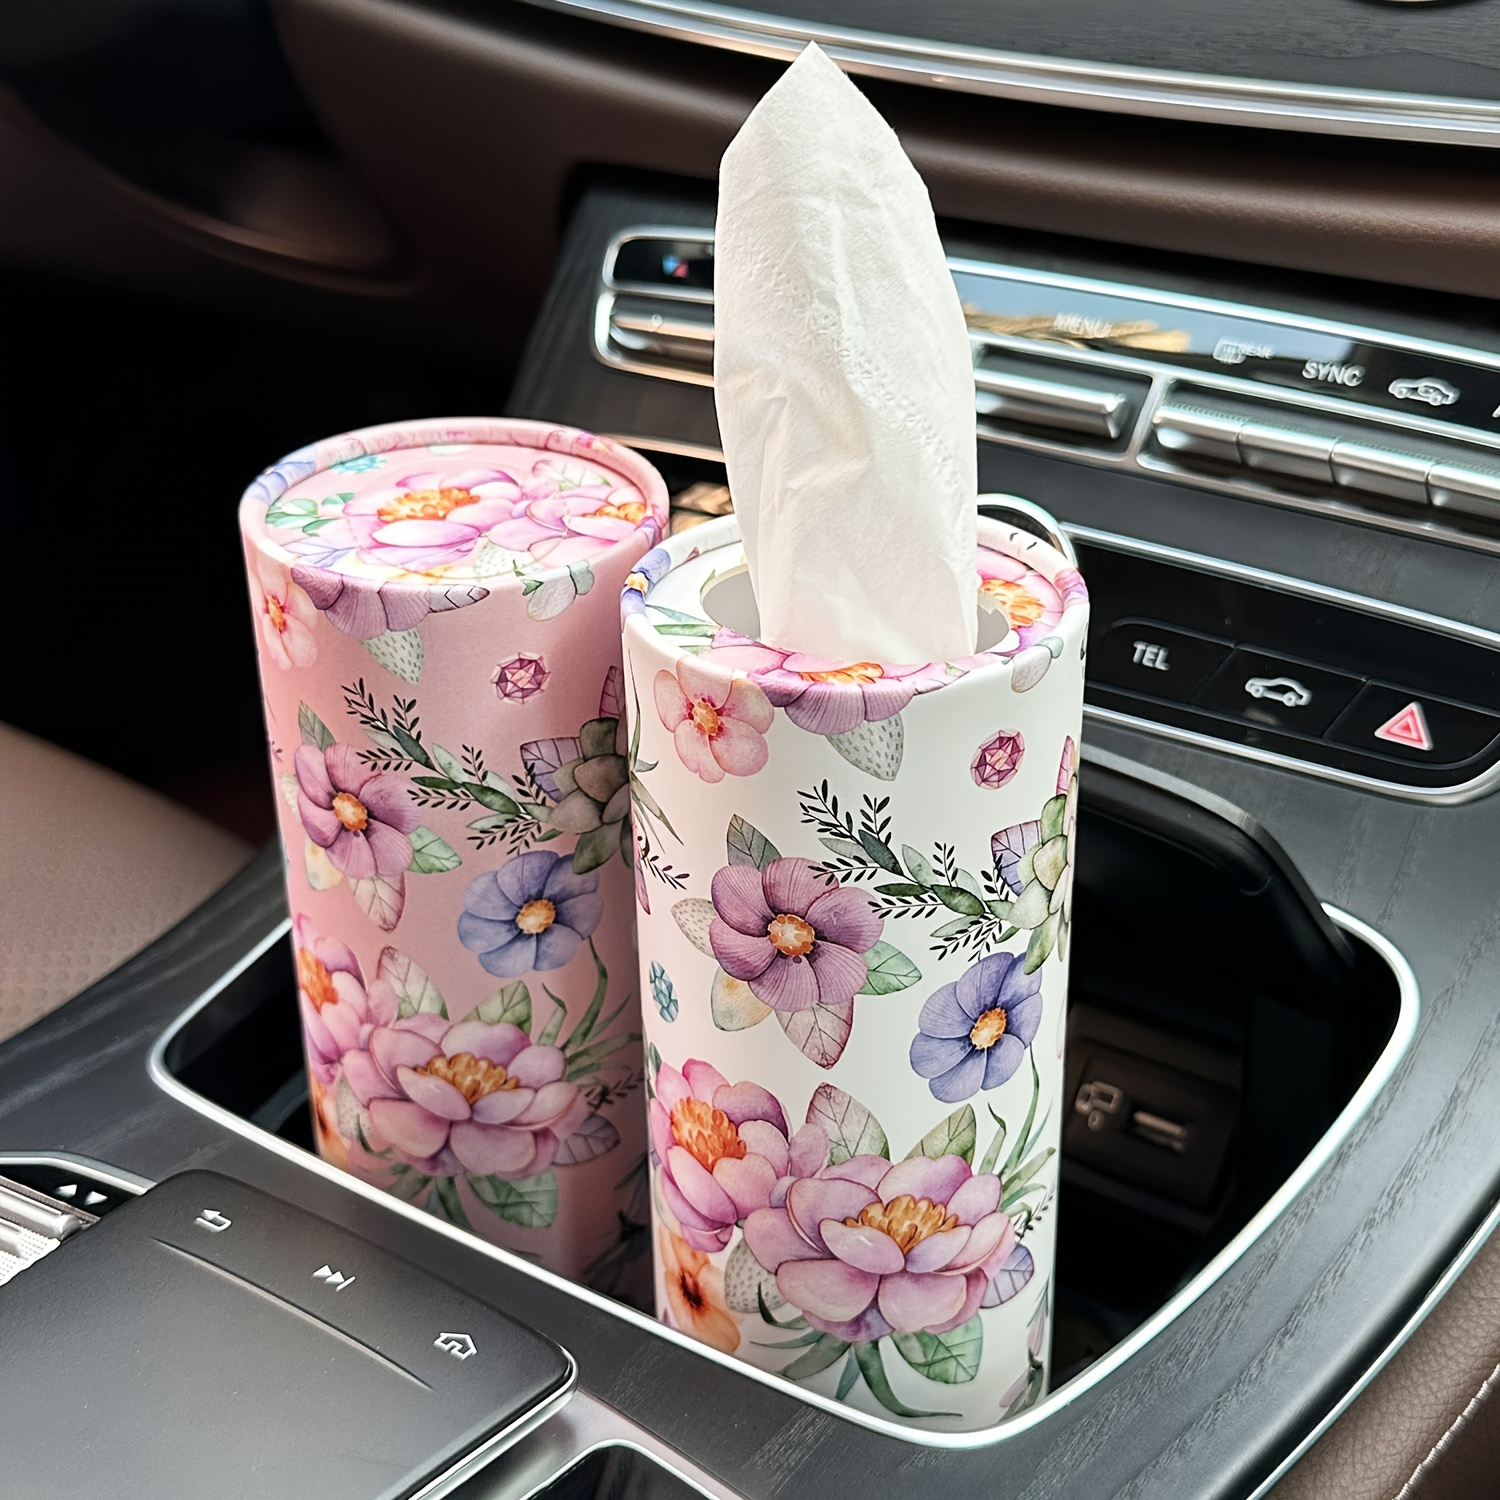 

Chic White Floral Car Tissue Holder With Facial Tissues - Versatile Round Tissue Case For Cup Holders, Perfect For Home & Travel